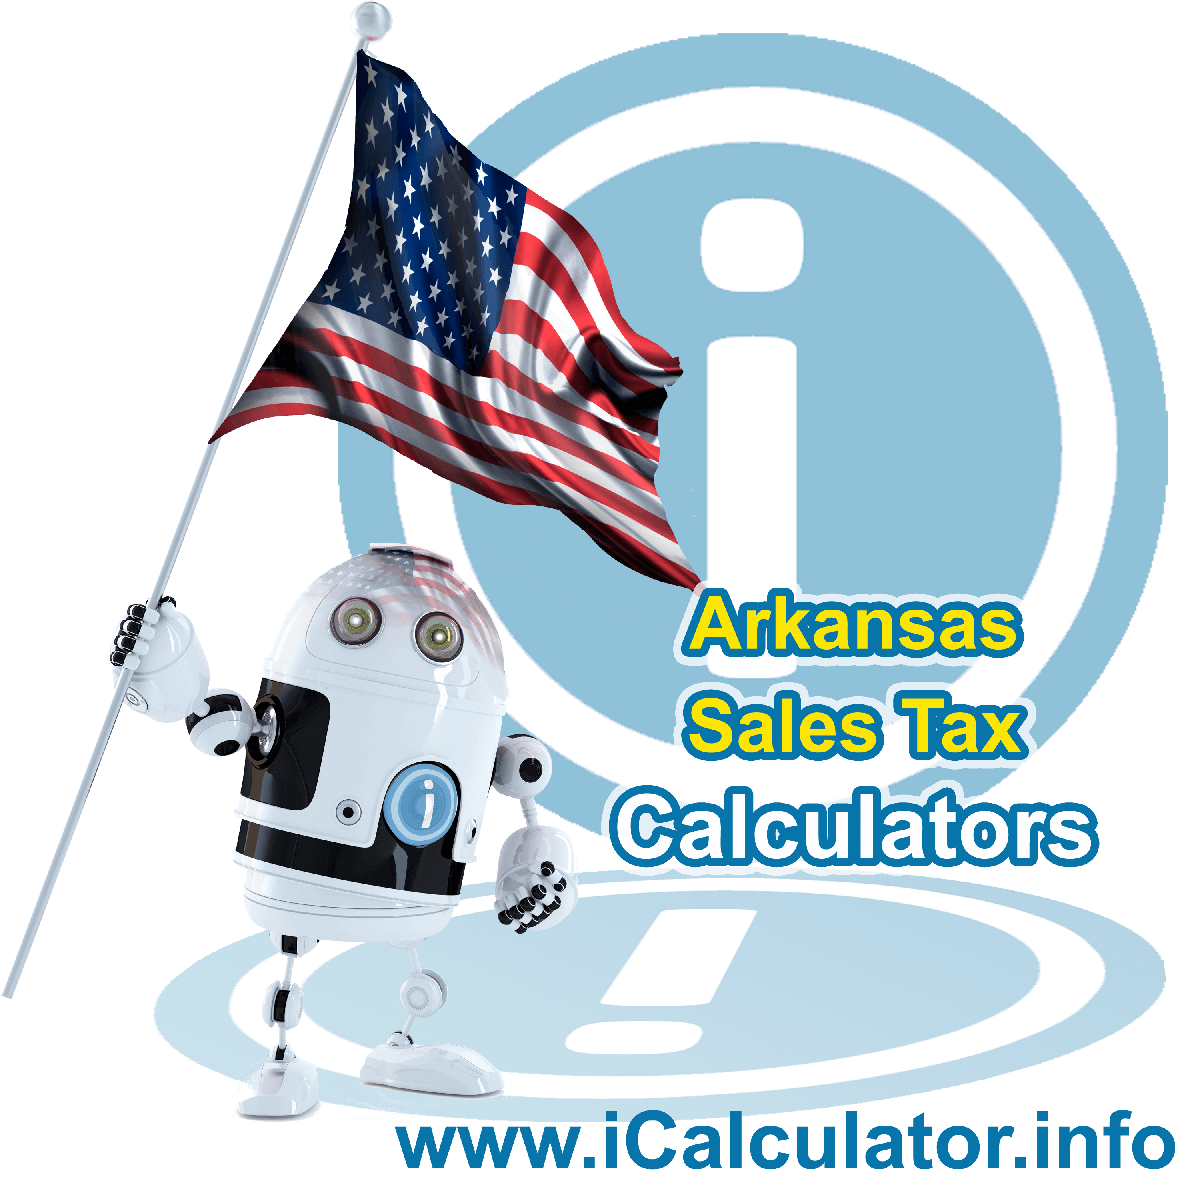 Russellville Sales Rates: This image illustrates a calculator robot calculating Russellville sales tax manually using the Russellville Sales Tax Formula. You can use this information to calculate Russellville Sales Tax manually or use the Russellville Sales Tax Calculator to calculate sales tax online.